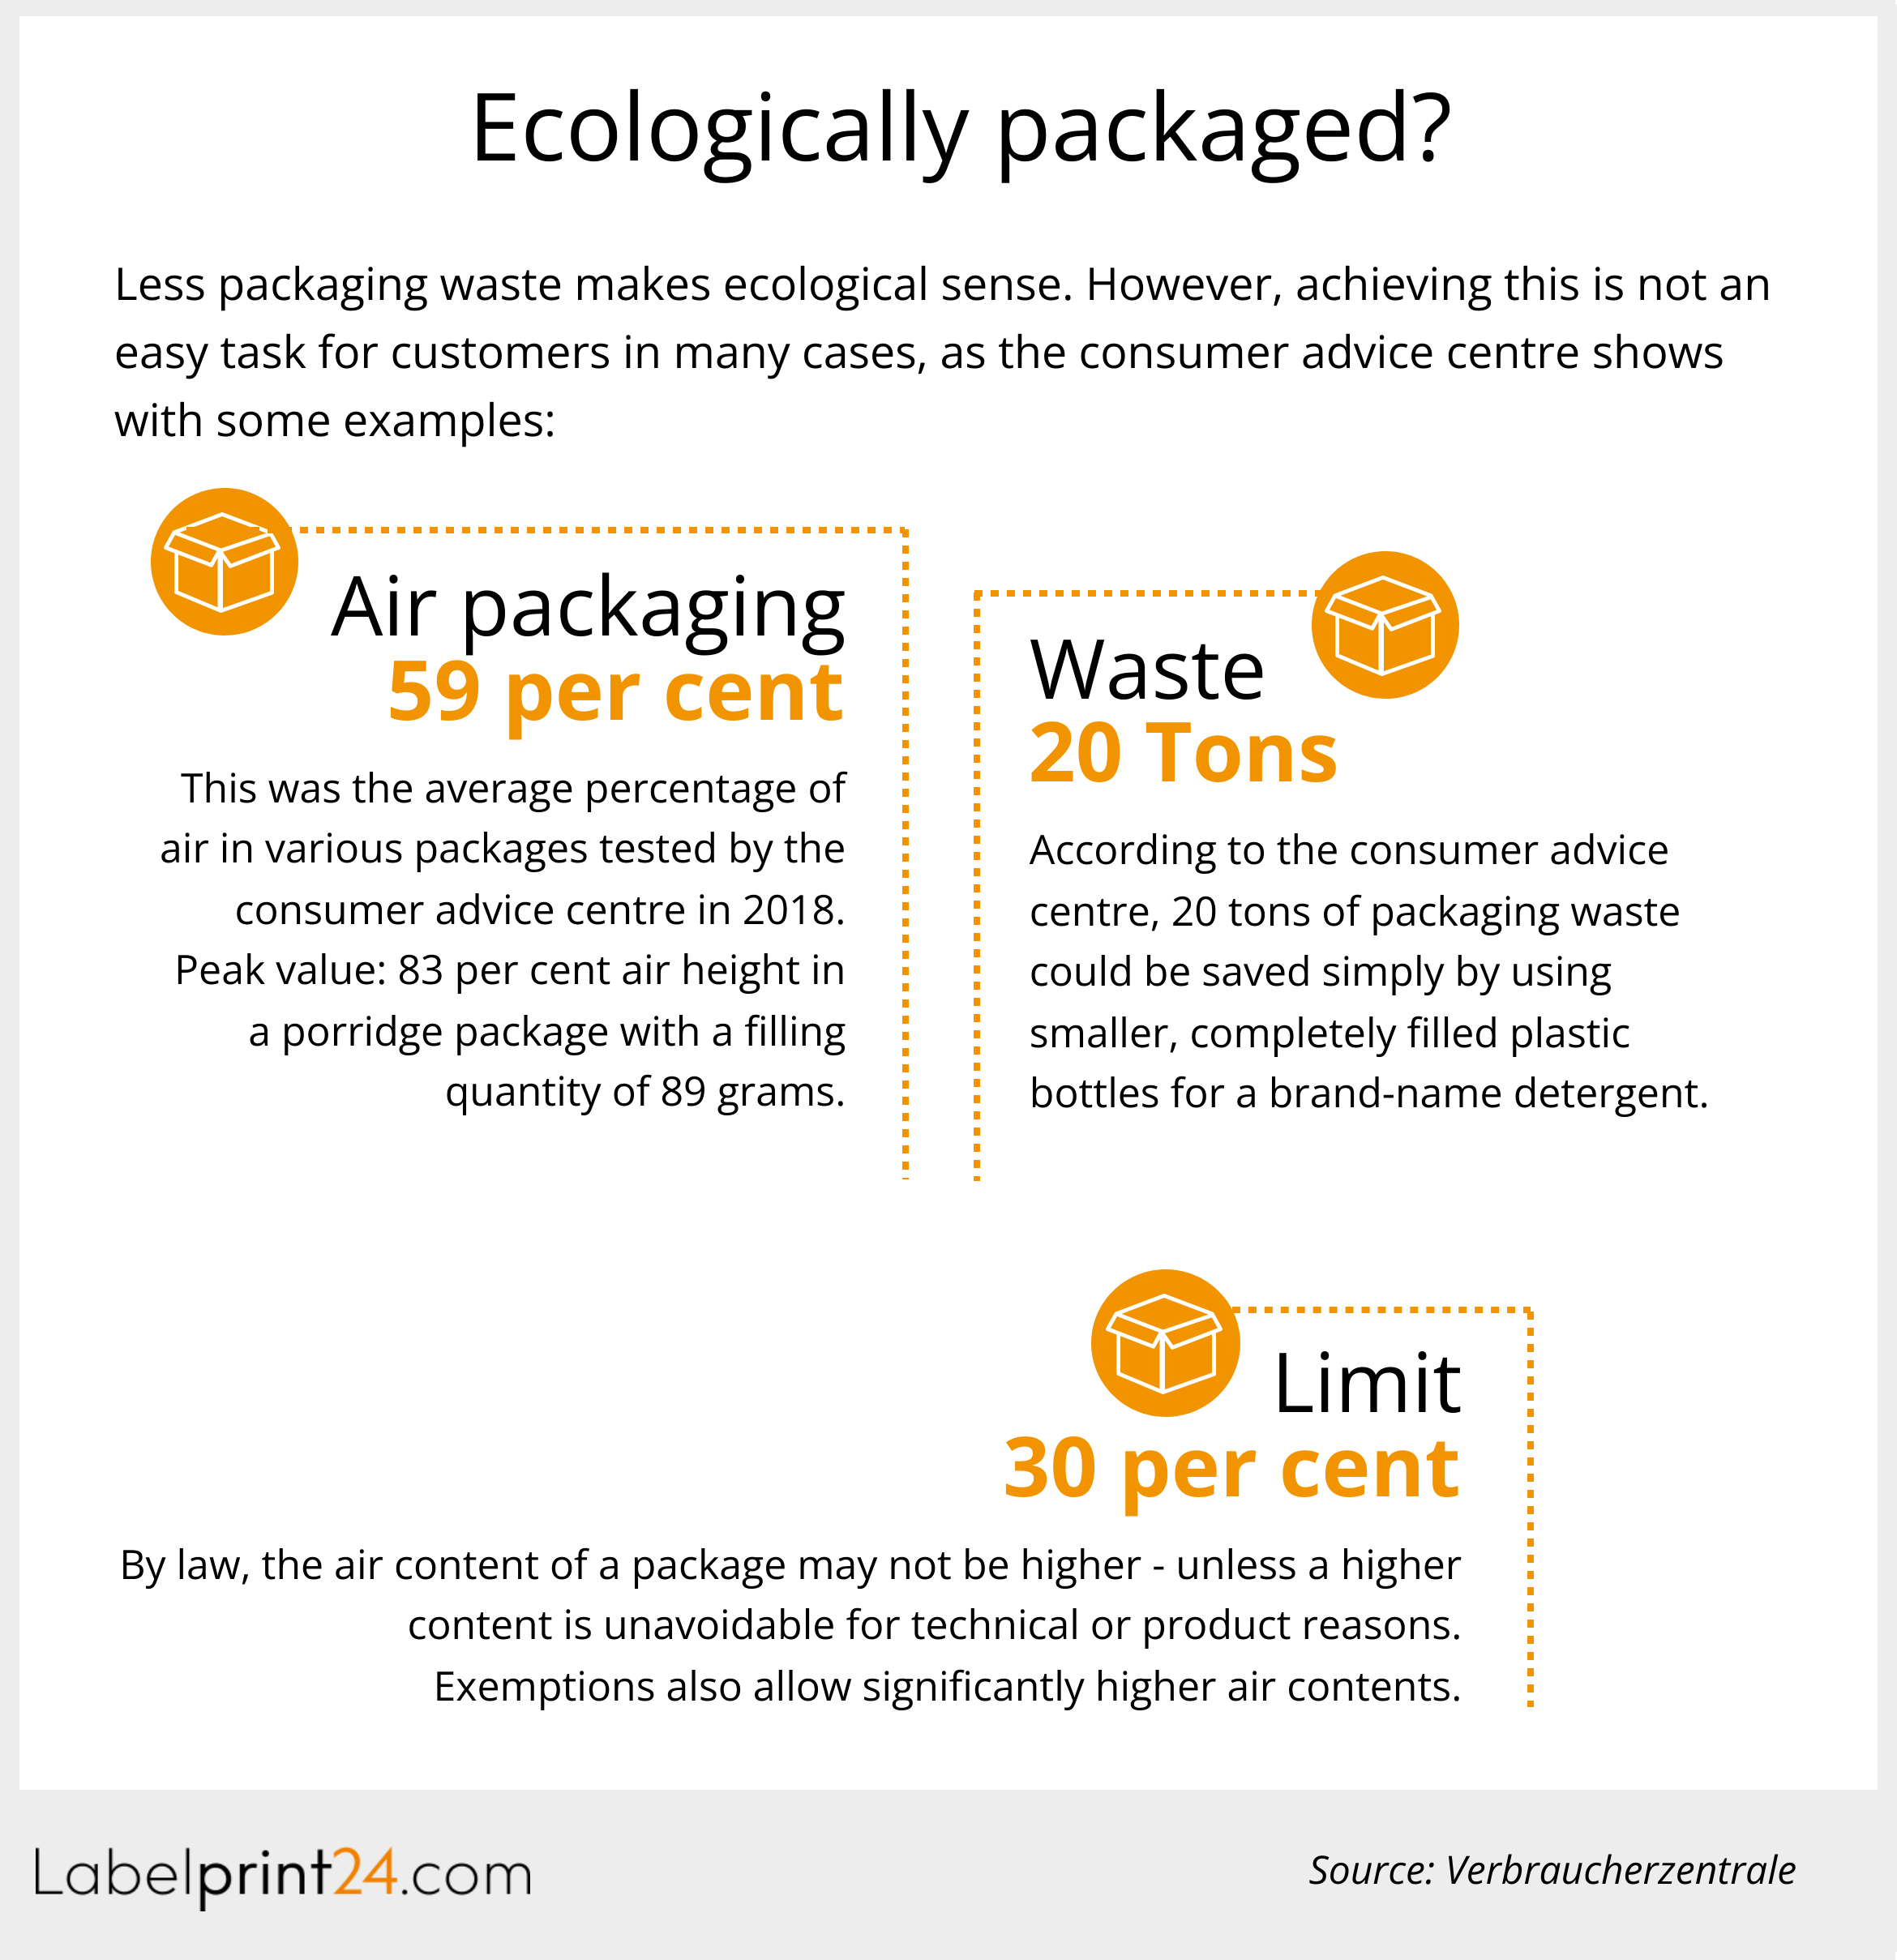 Ecologically packaged